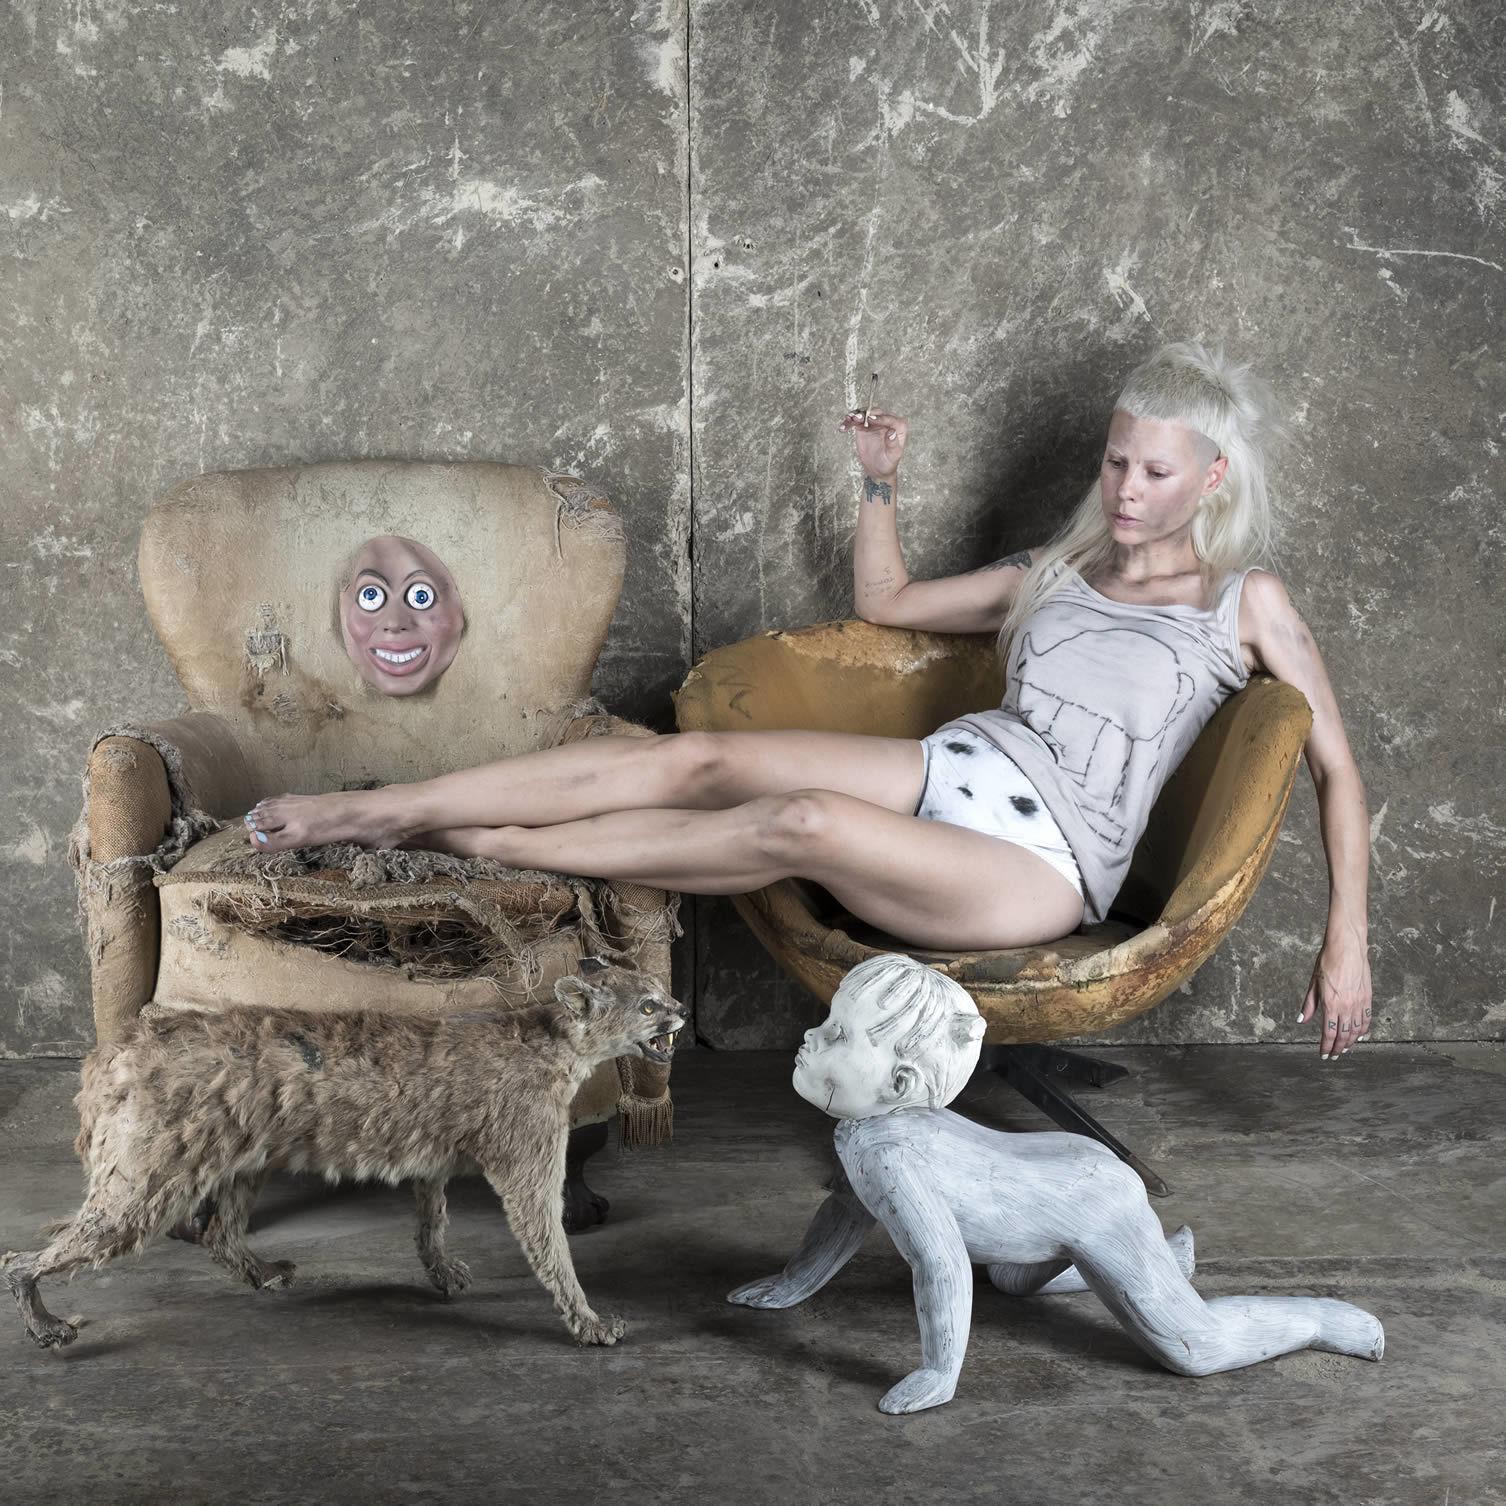 70+ Hot Pictures Of Yolandi Visser Are Sexy As Hell That You Will Melt 15